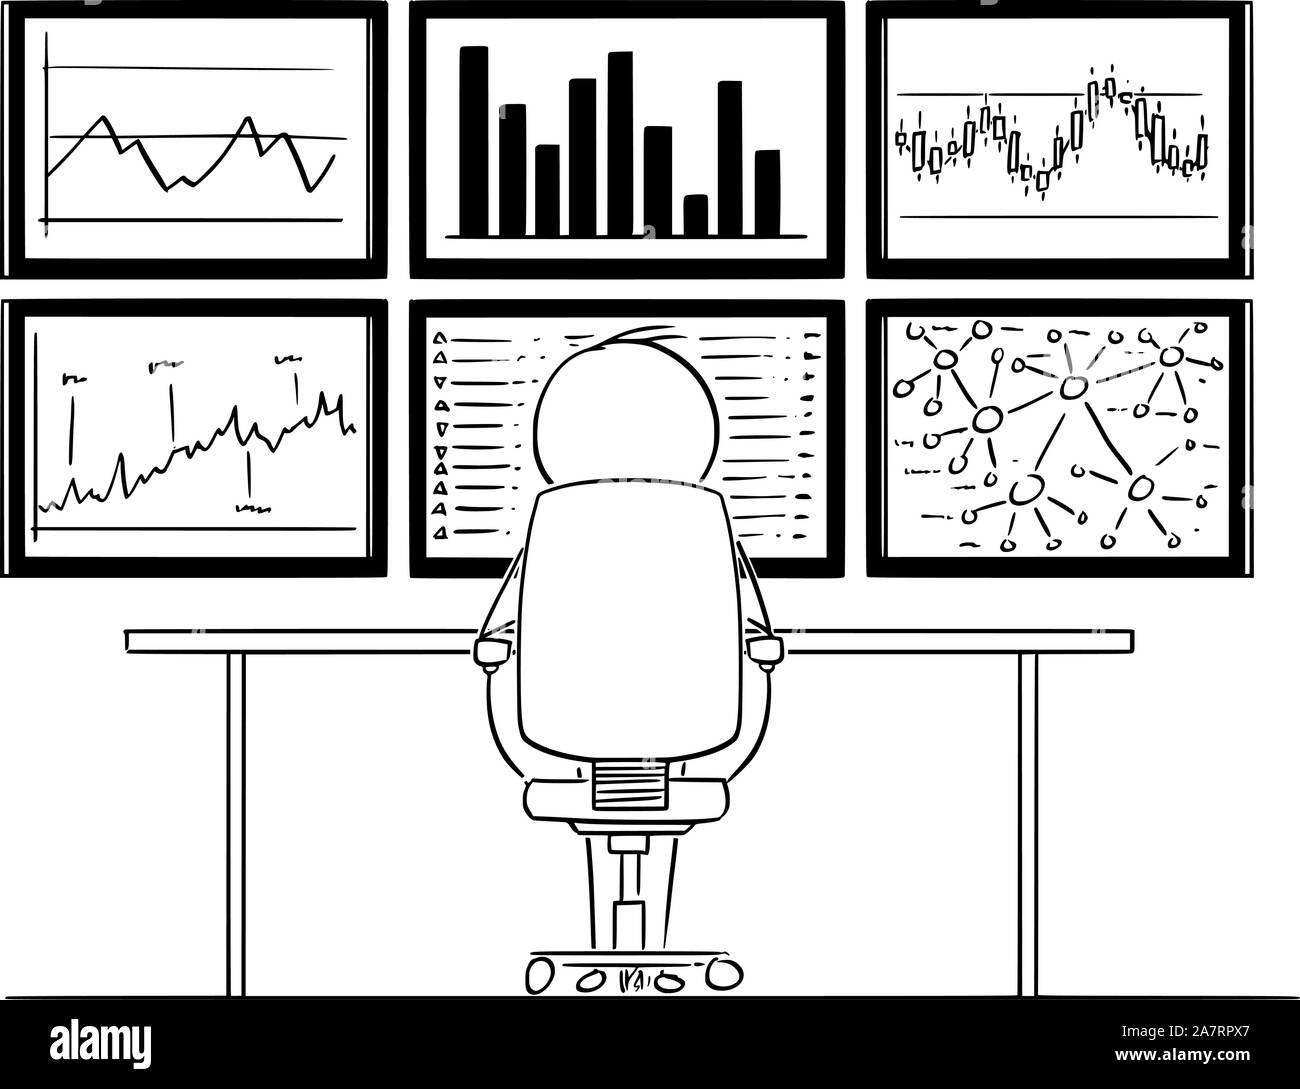 Vector cartoon stick figure drawing conceptual illustration of man or businessman sitting in front of six computer monitors mounted on wall, and analyzing graphs and market data. Stock Vector